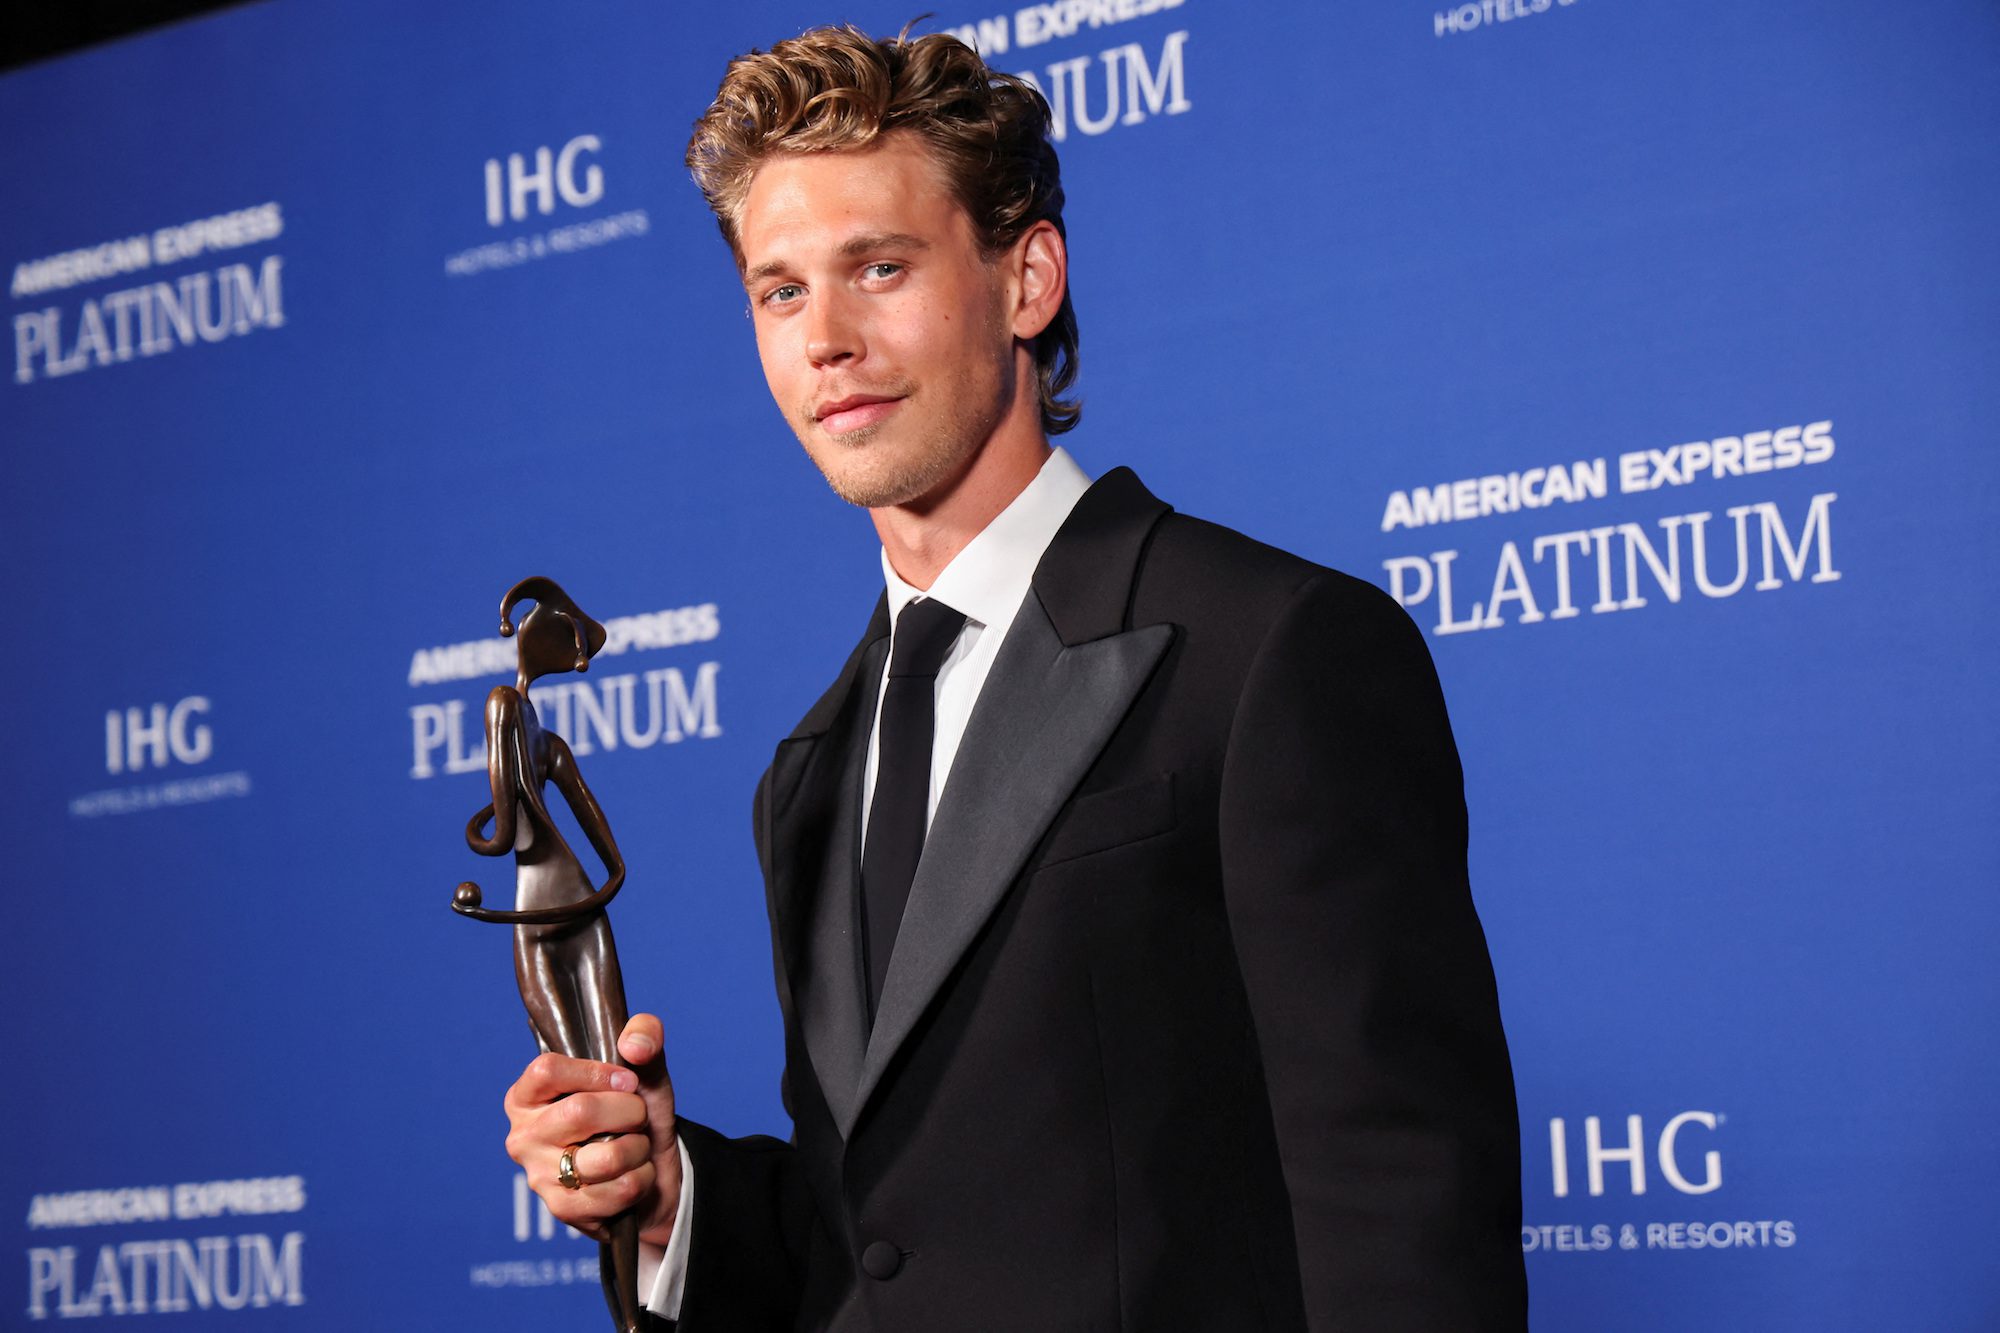 Actor Austin Butler poses backstage after receiving the Breakthrough Performance Award at the 34th Annual Palm Springs International Film Festival Awards gala in Palm Springs, California, U.S., January 5, 2023. REUTERS/Mario Anzuoni